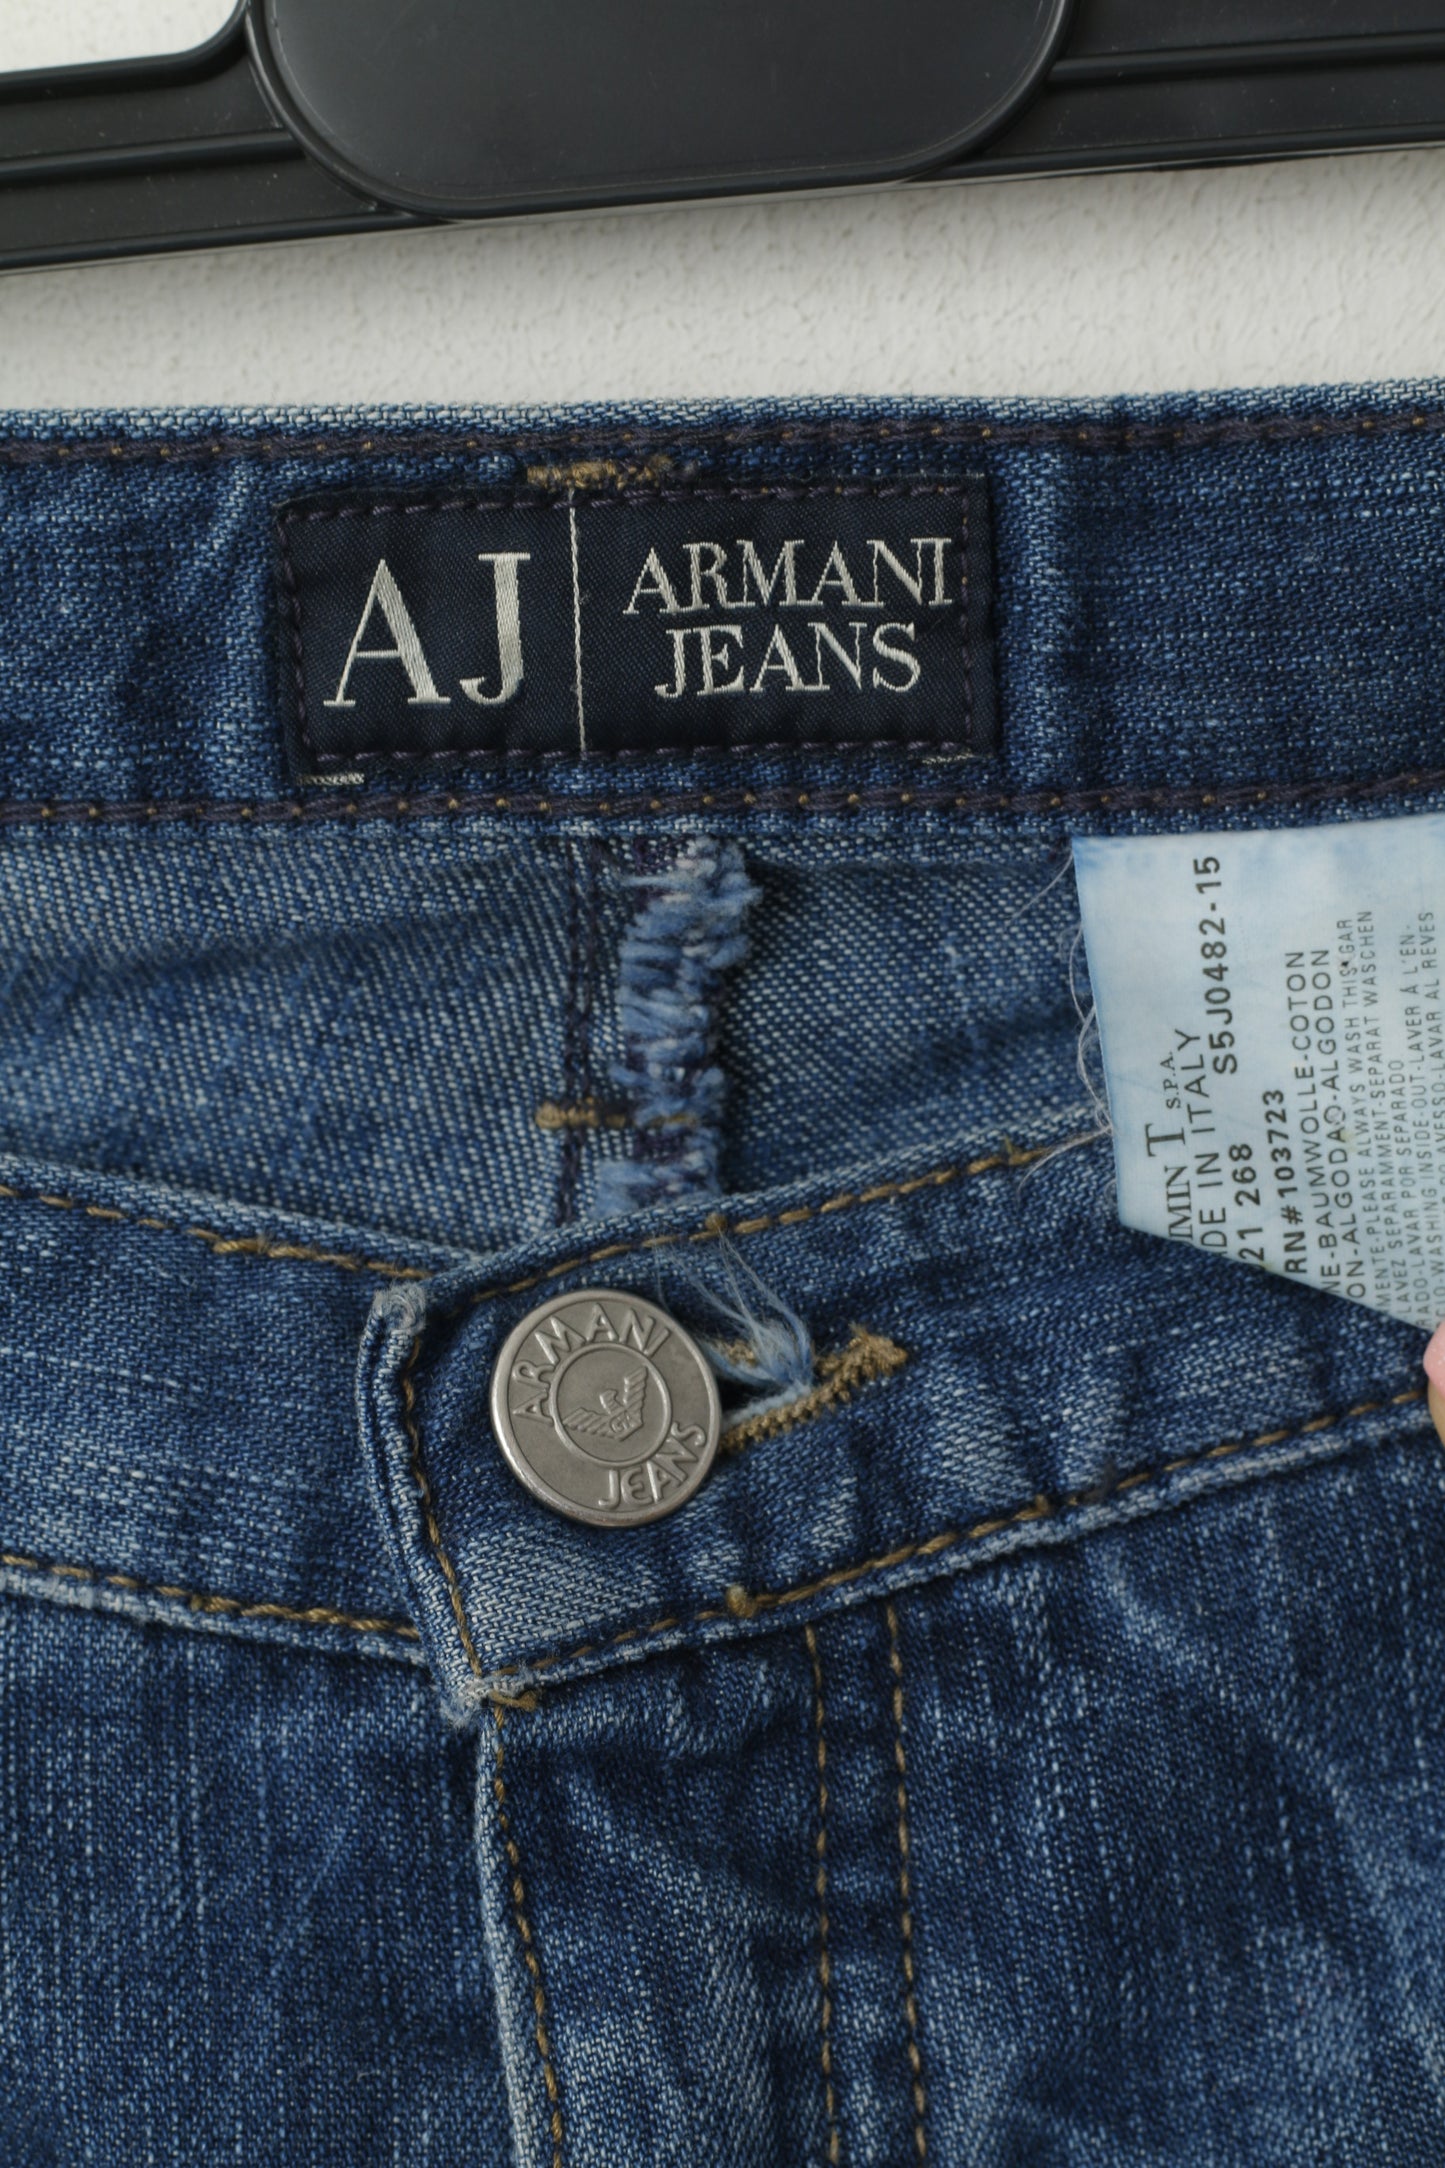 Armani Jeans Men 31 Jeans Trousers Navy Cotton Denim Made in Italy Pants